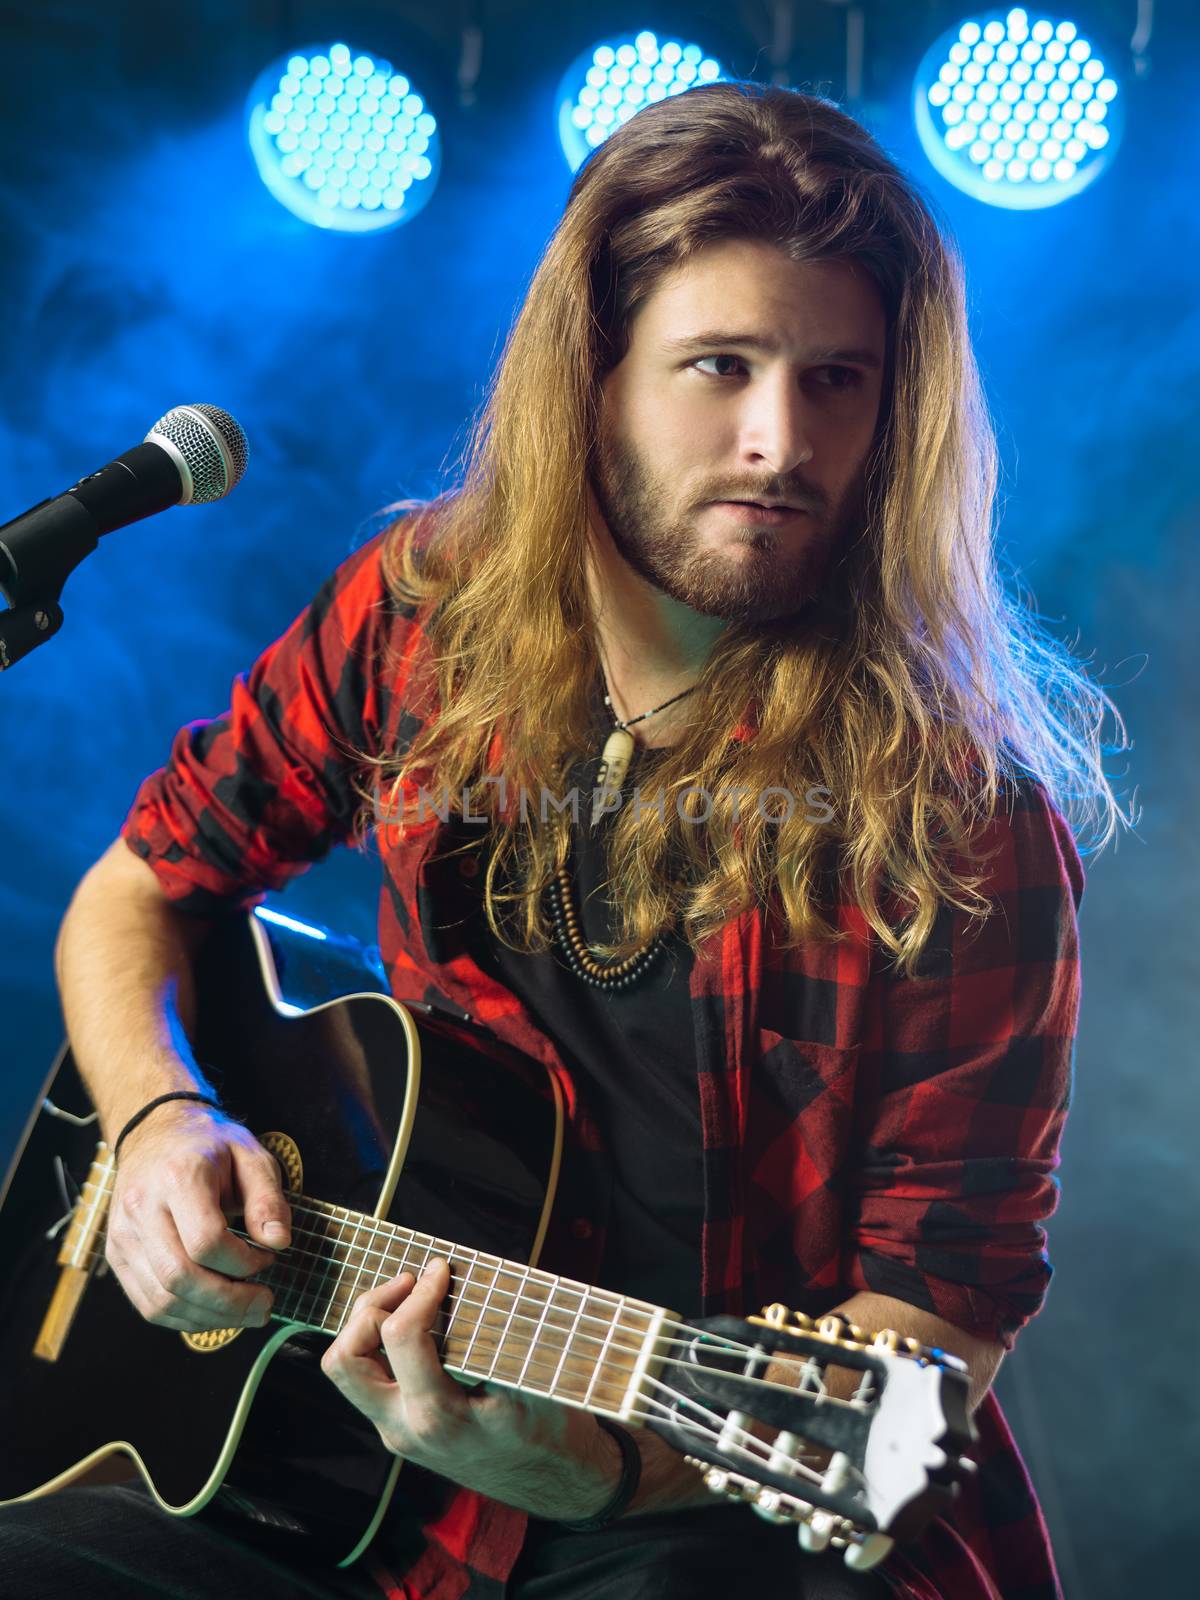 Photo of a young man with long hair and a beard playing an acoustic guitar on stage with lights and concert atmosphere.